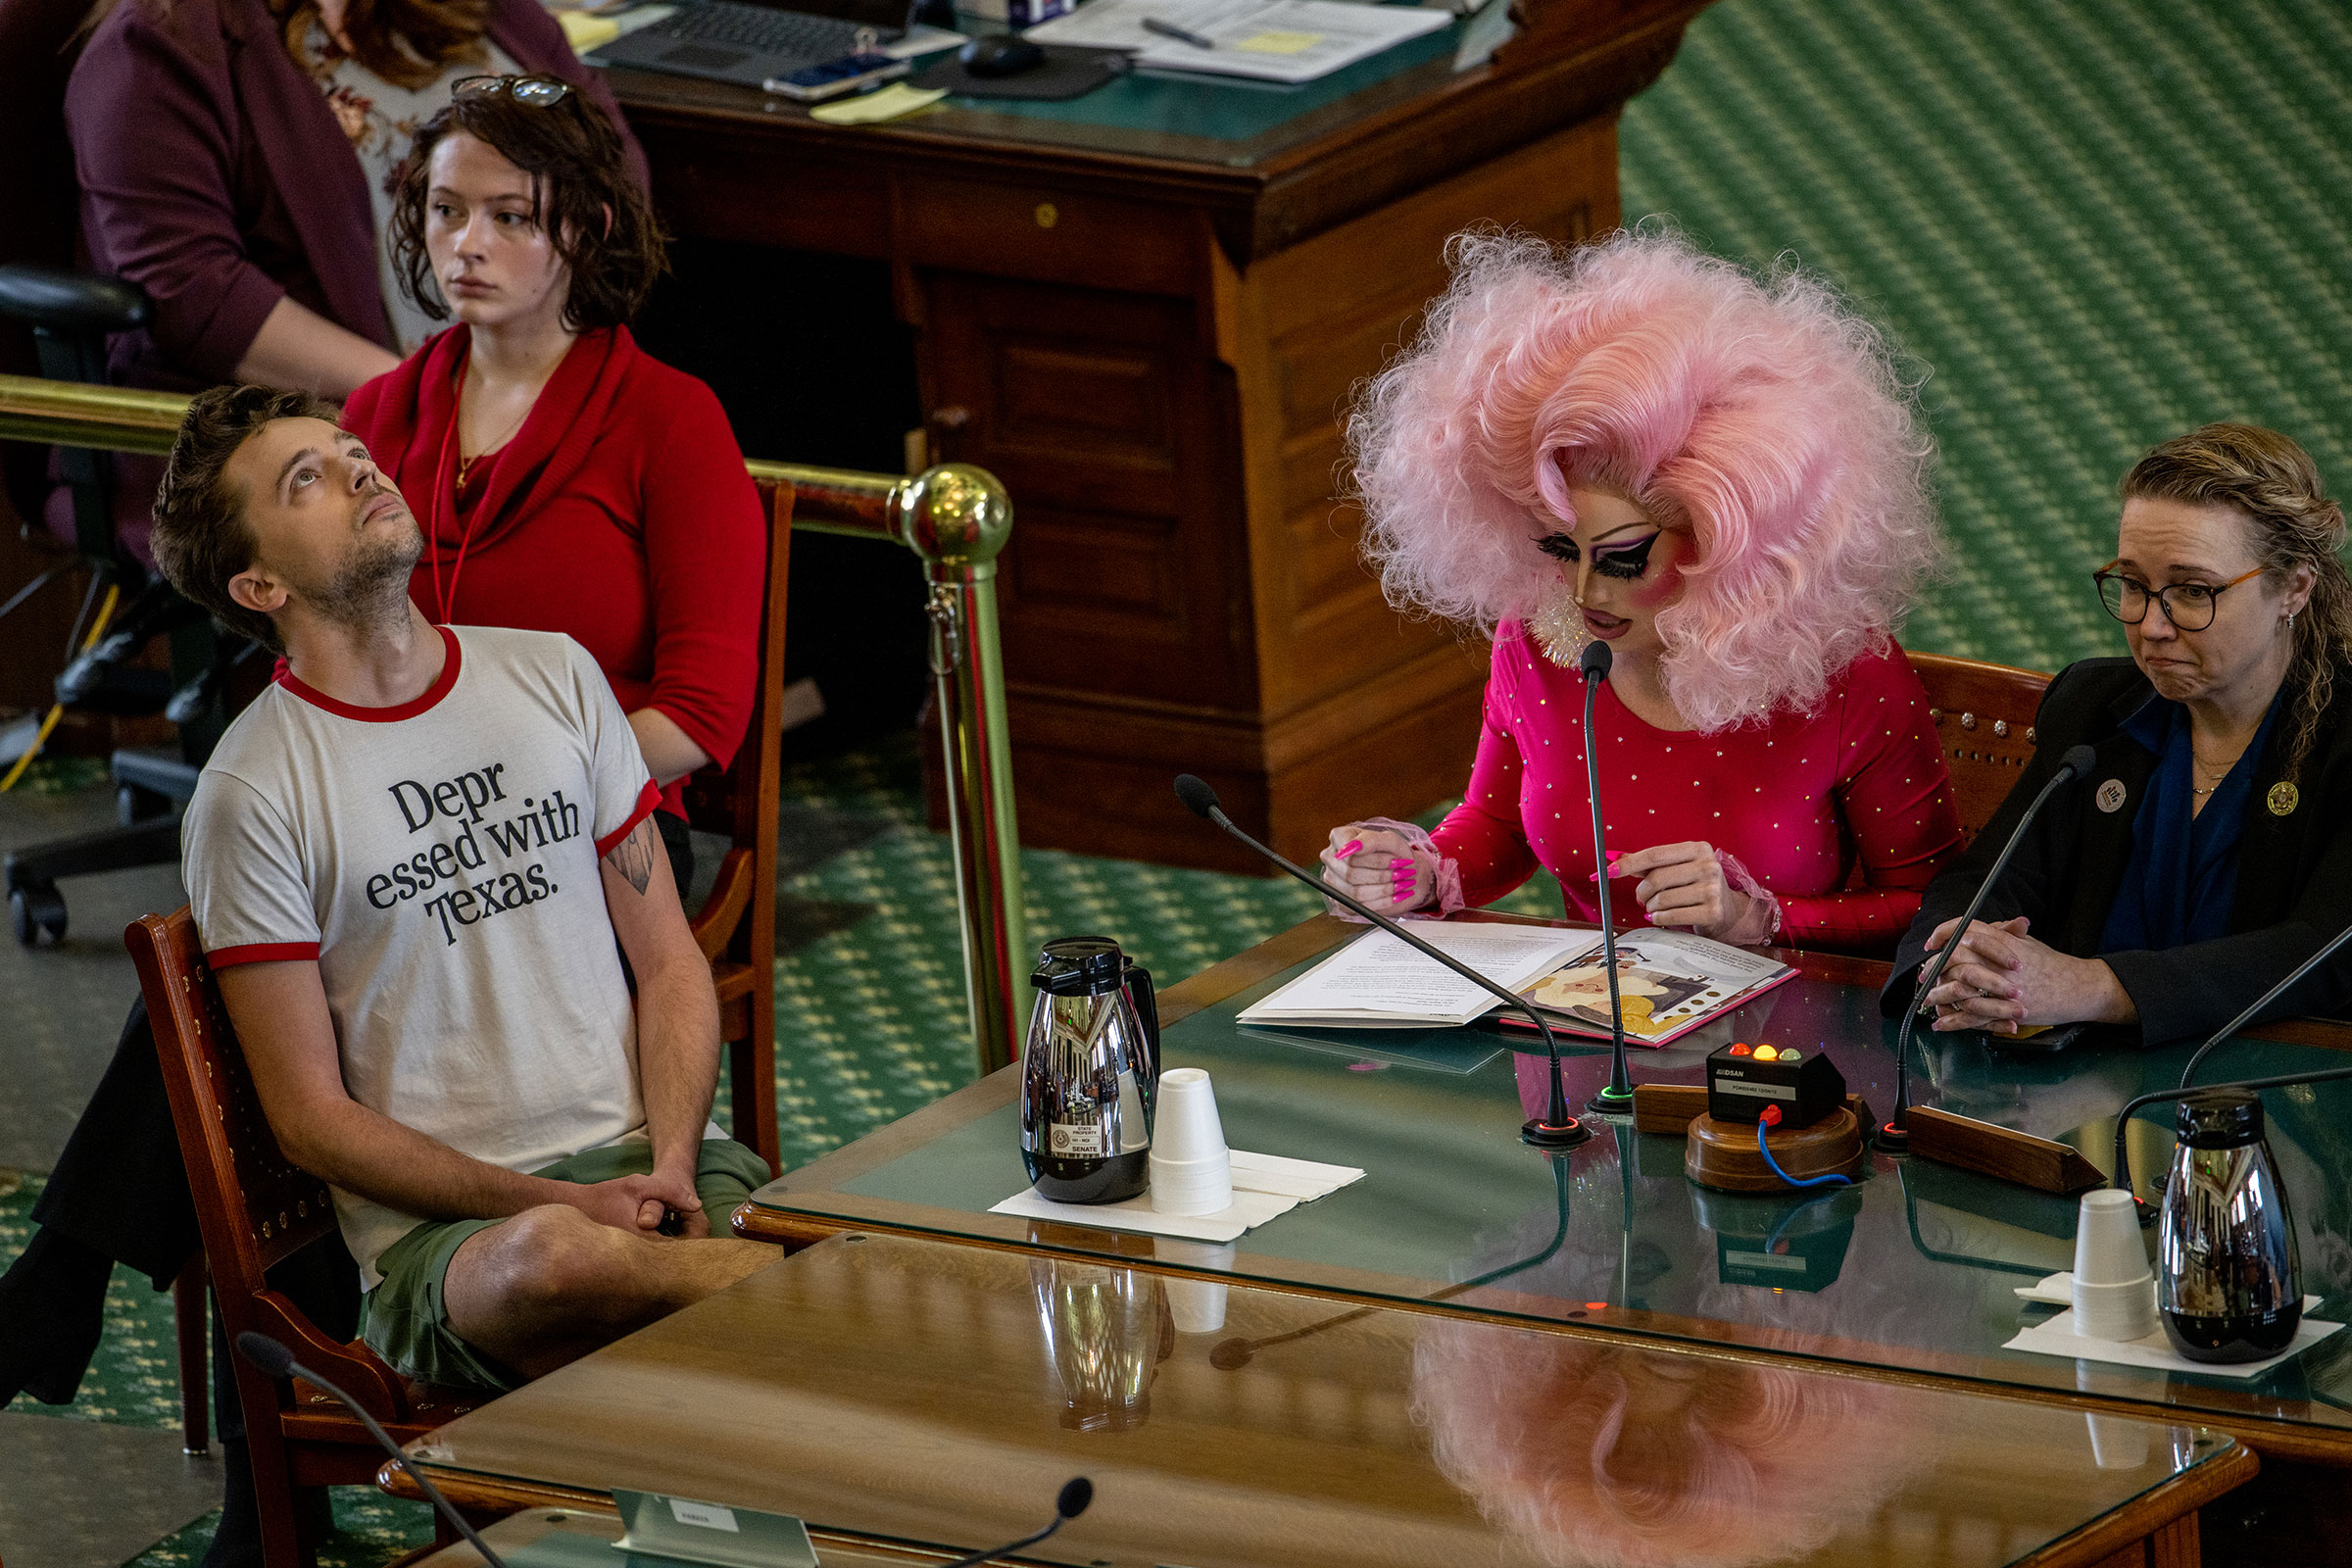 Drag Queen Brigitte Bandit gives testimony in the Senate Chamber at the Texas State Capitol in Austin, on March 23. People across the state of Texas showed up to give testimony as proposed Senate bills SB12 and SB1601, which would regulate drag performances, were discussed before the Chamber.